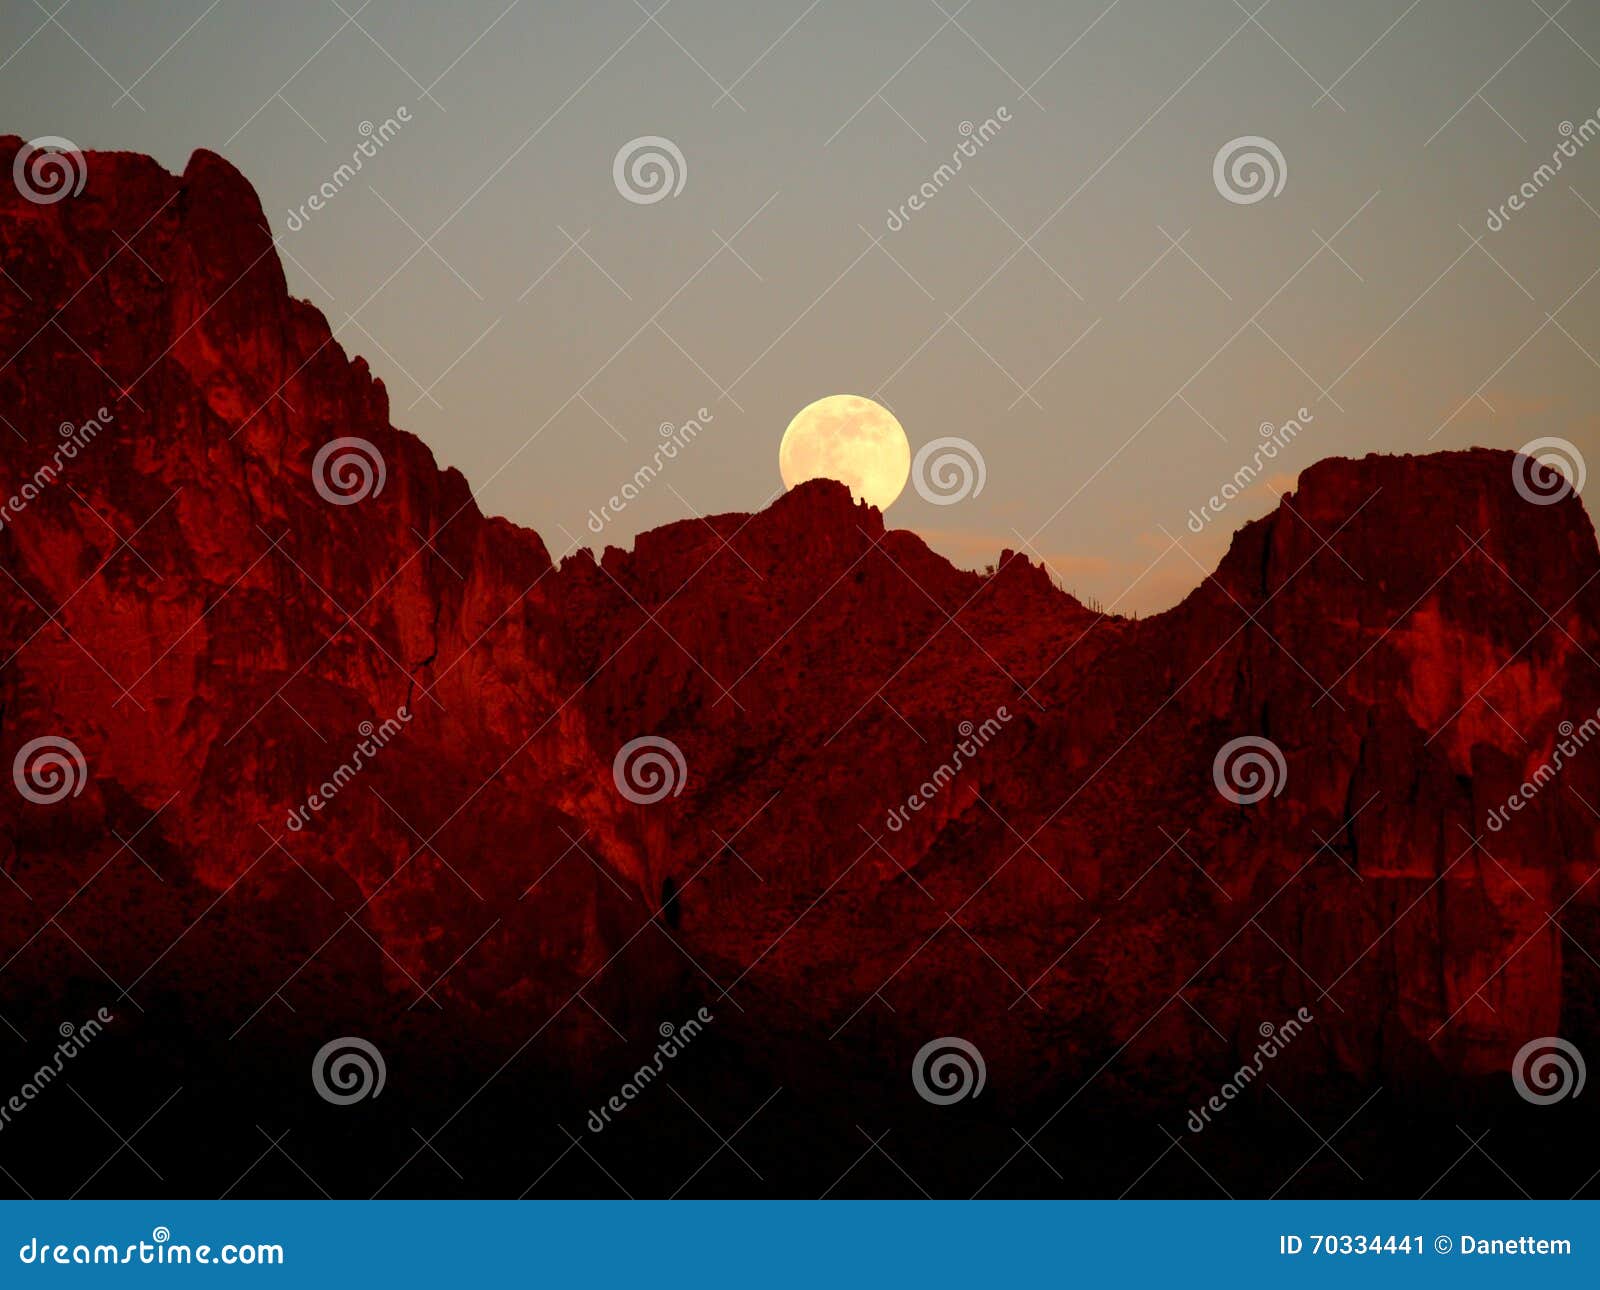 the strawberry supermoon rising over the superstition mountains at sunset